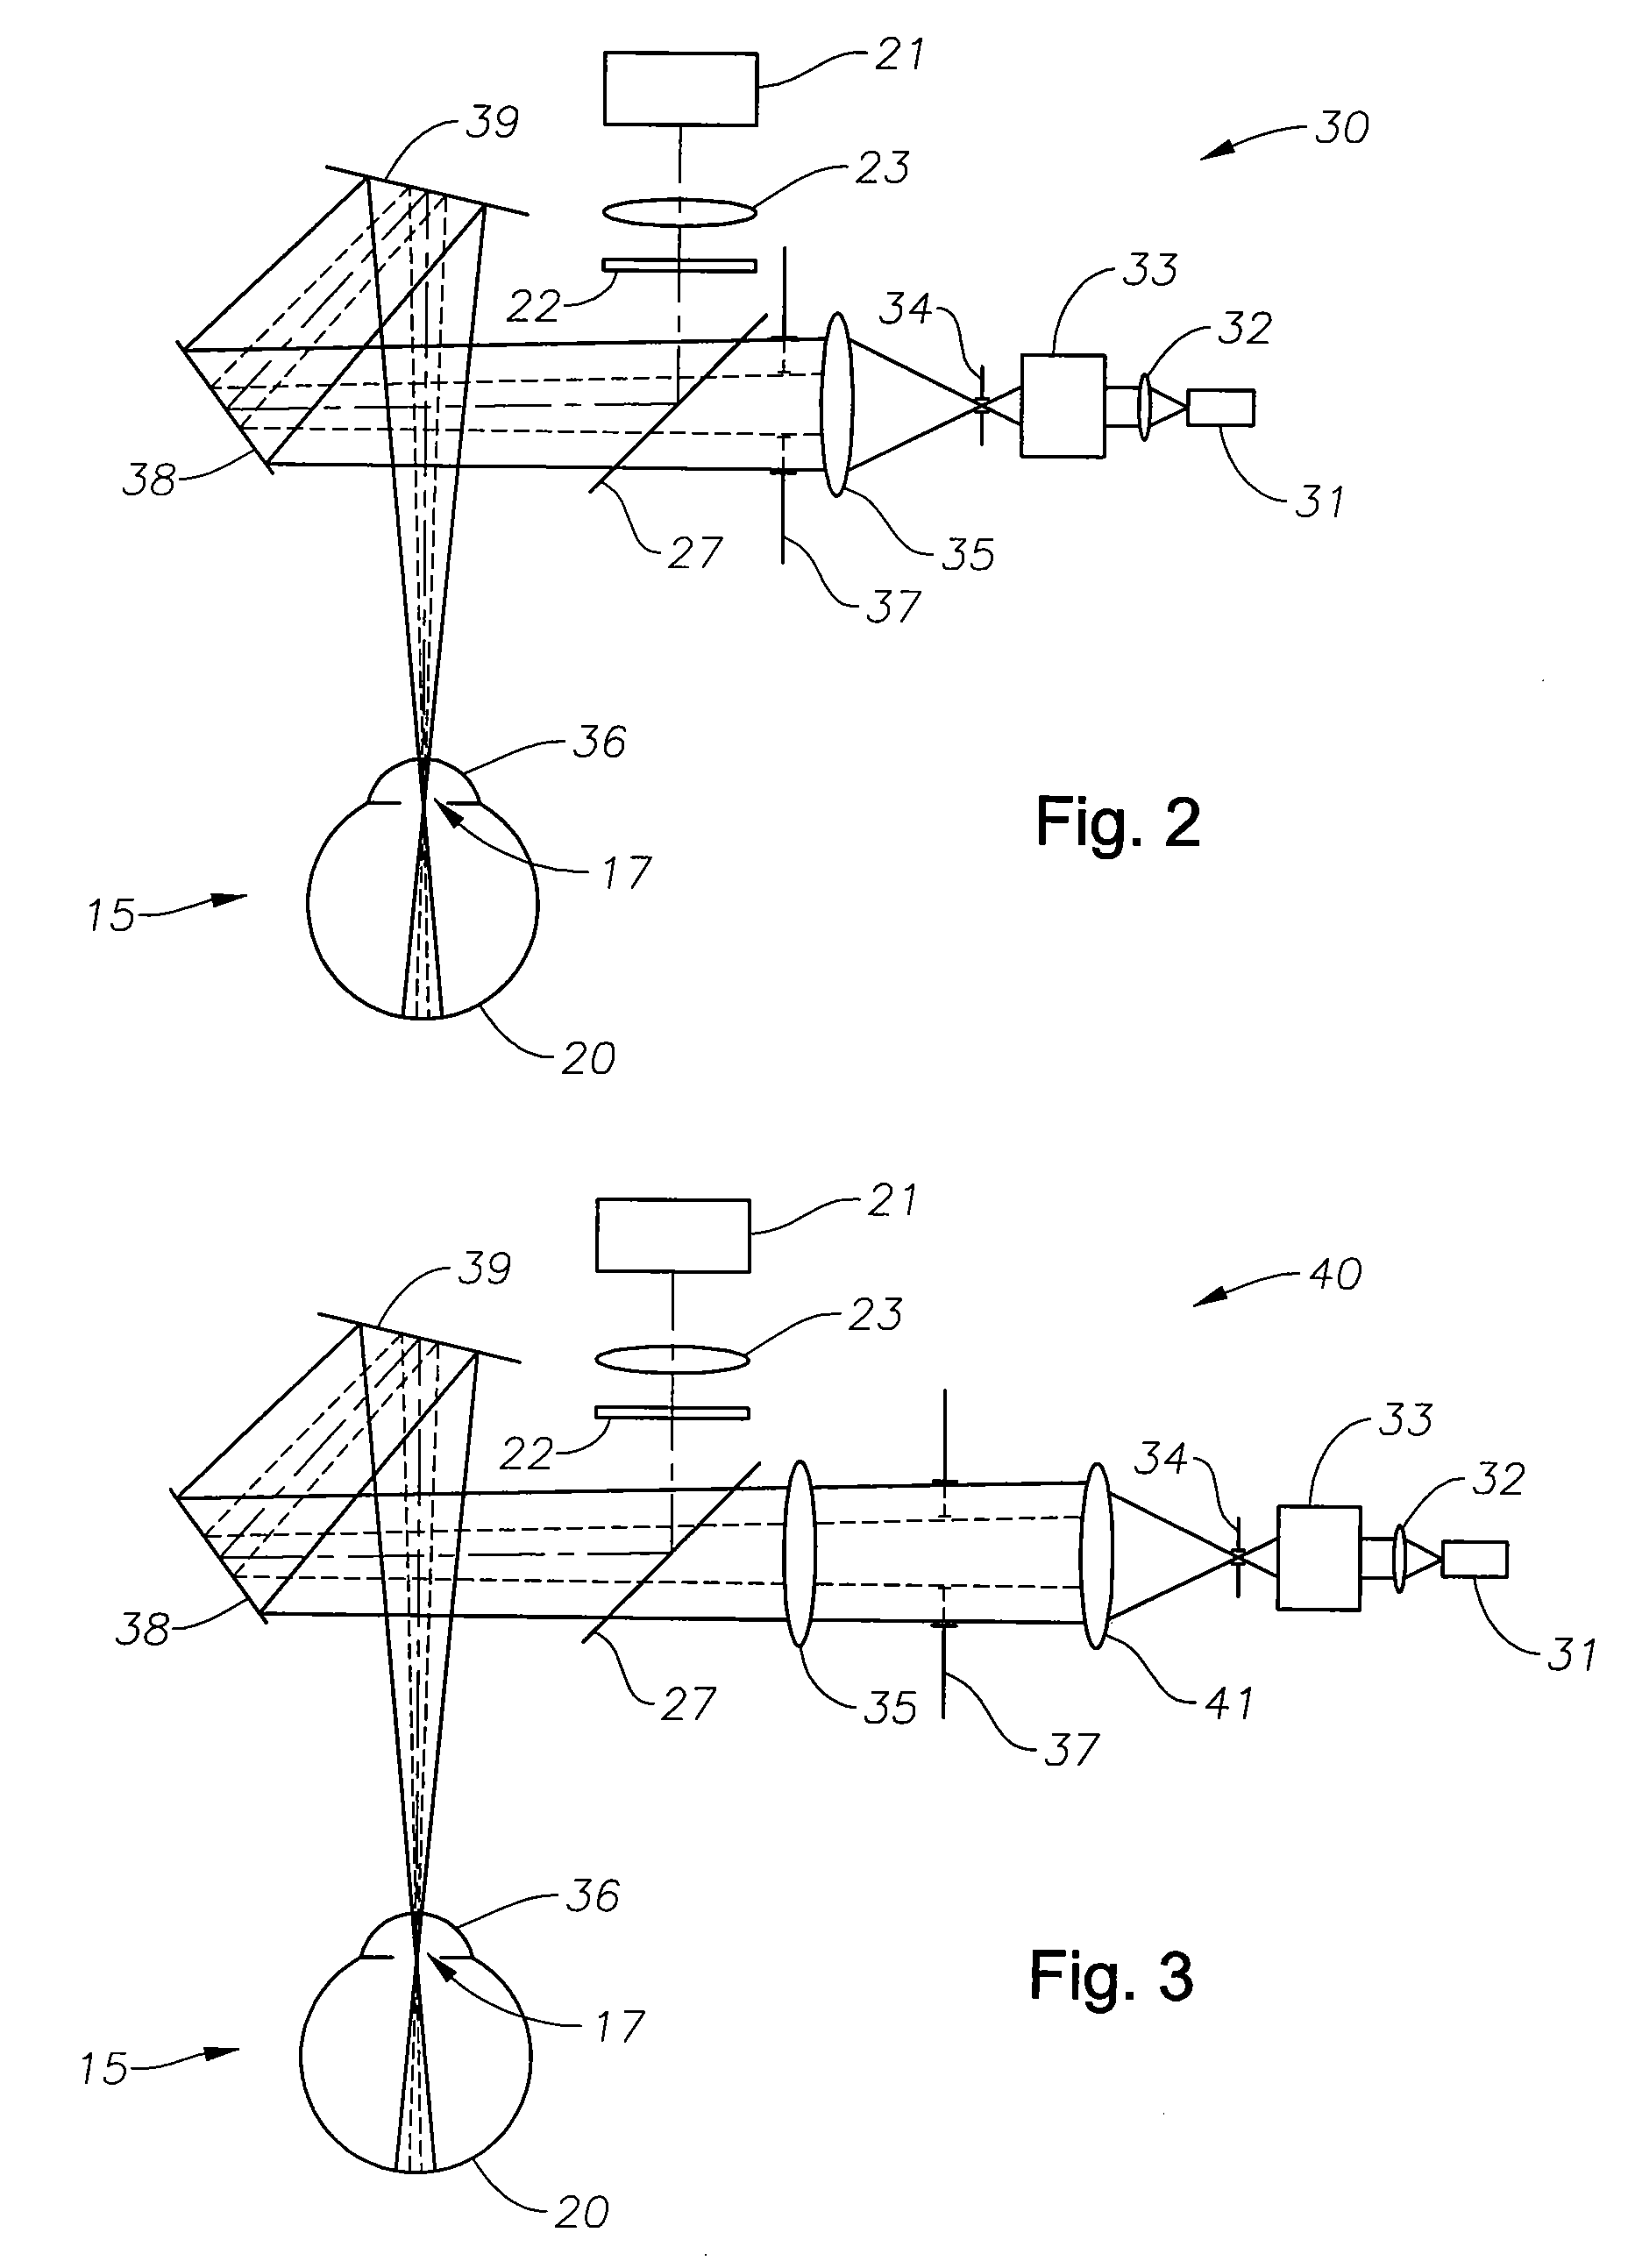 Retinal reflection generation and detection system and associated methods